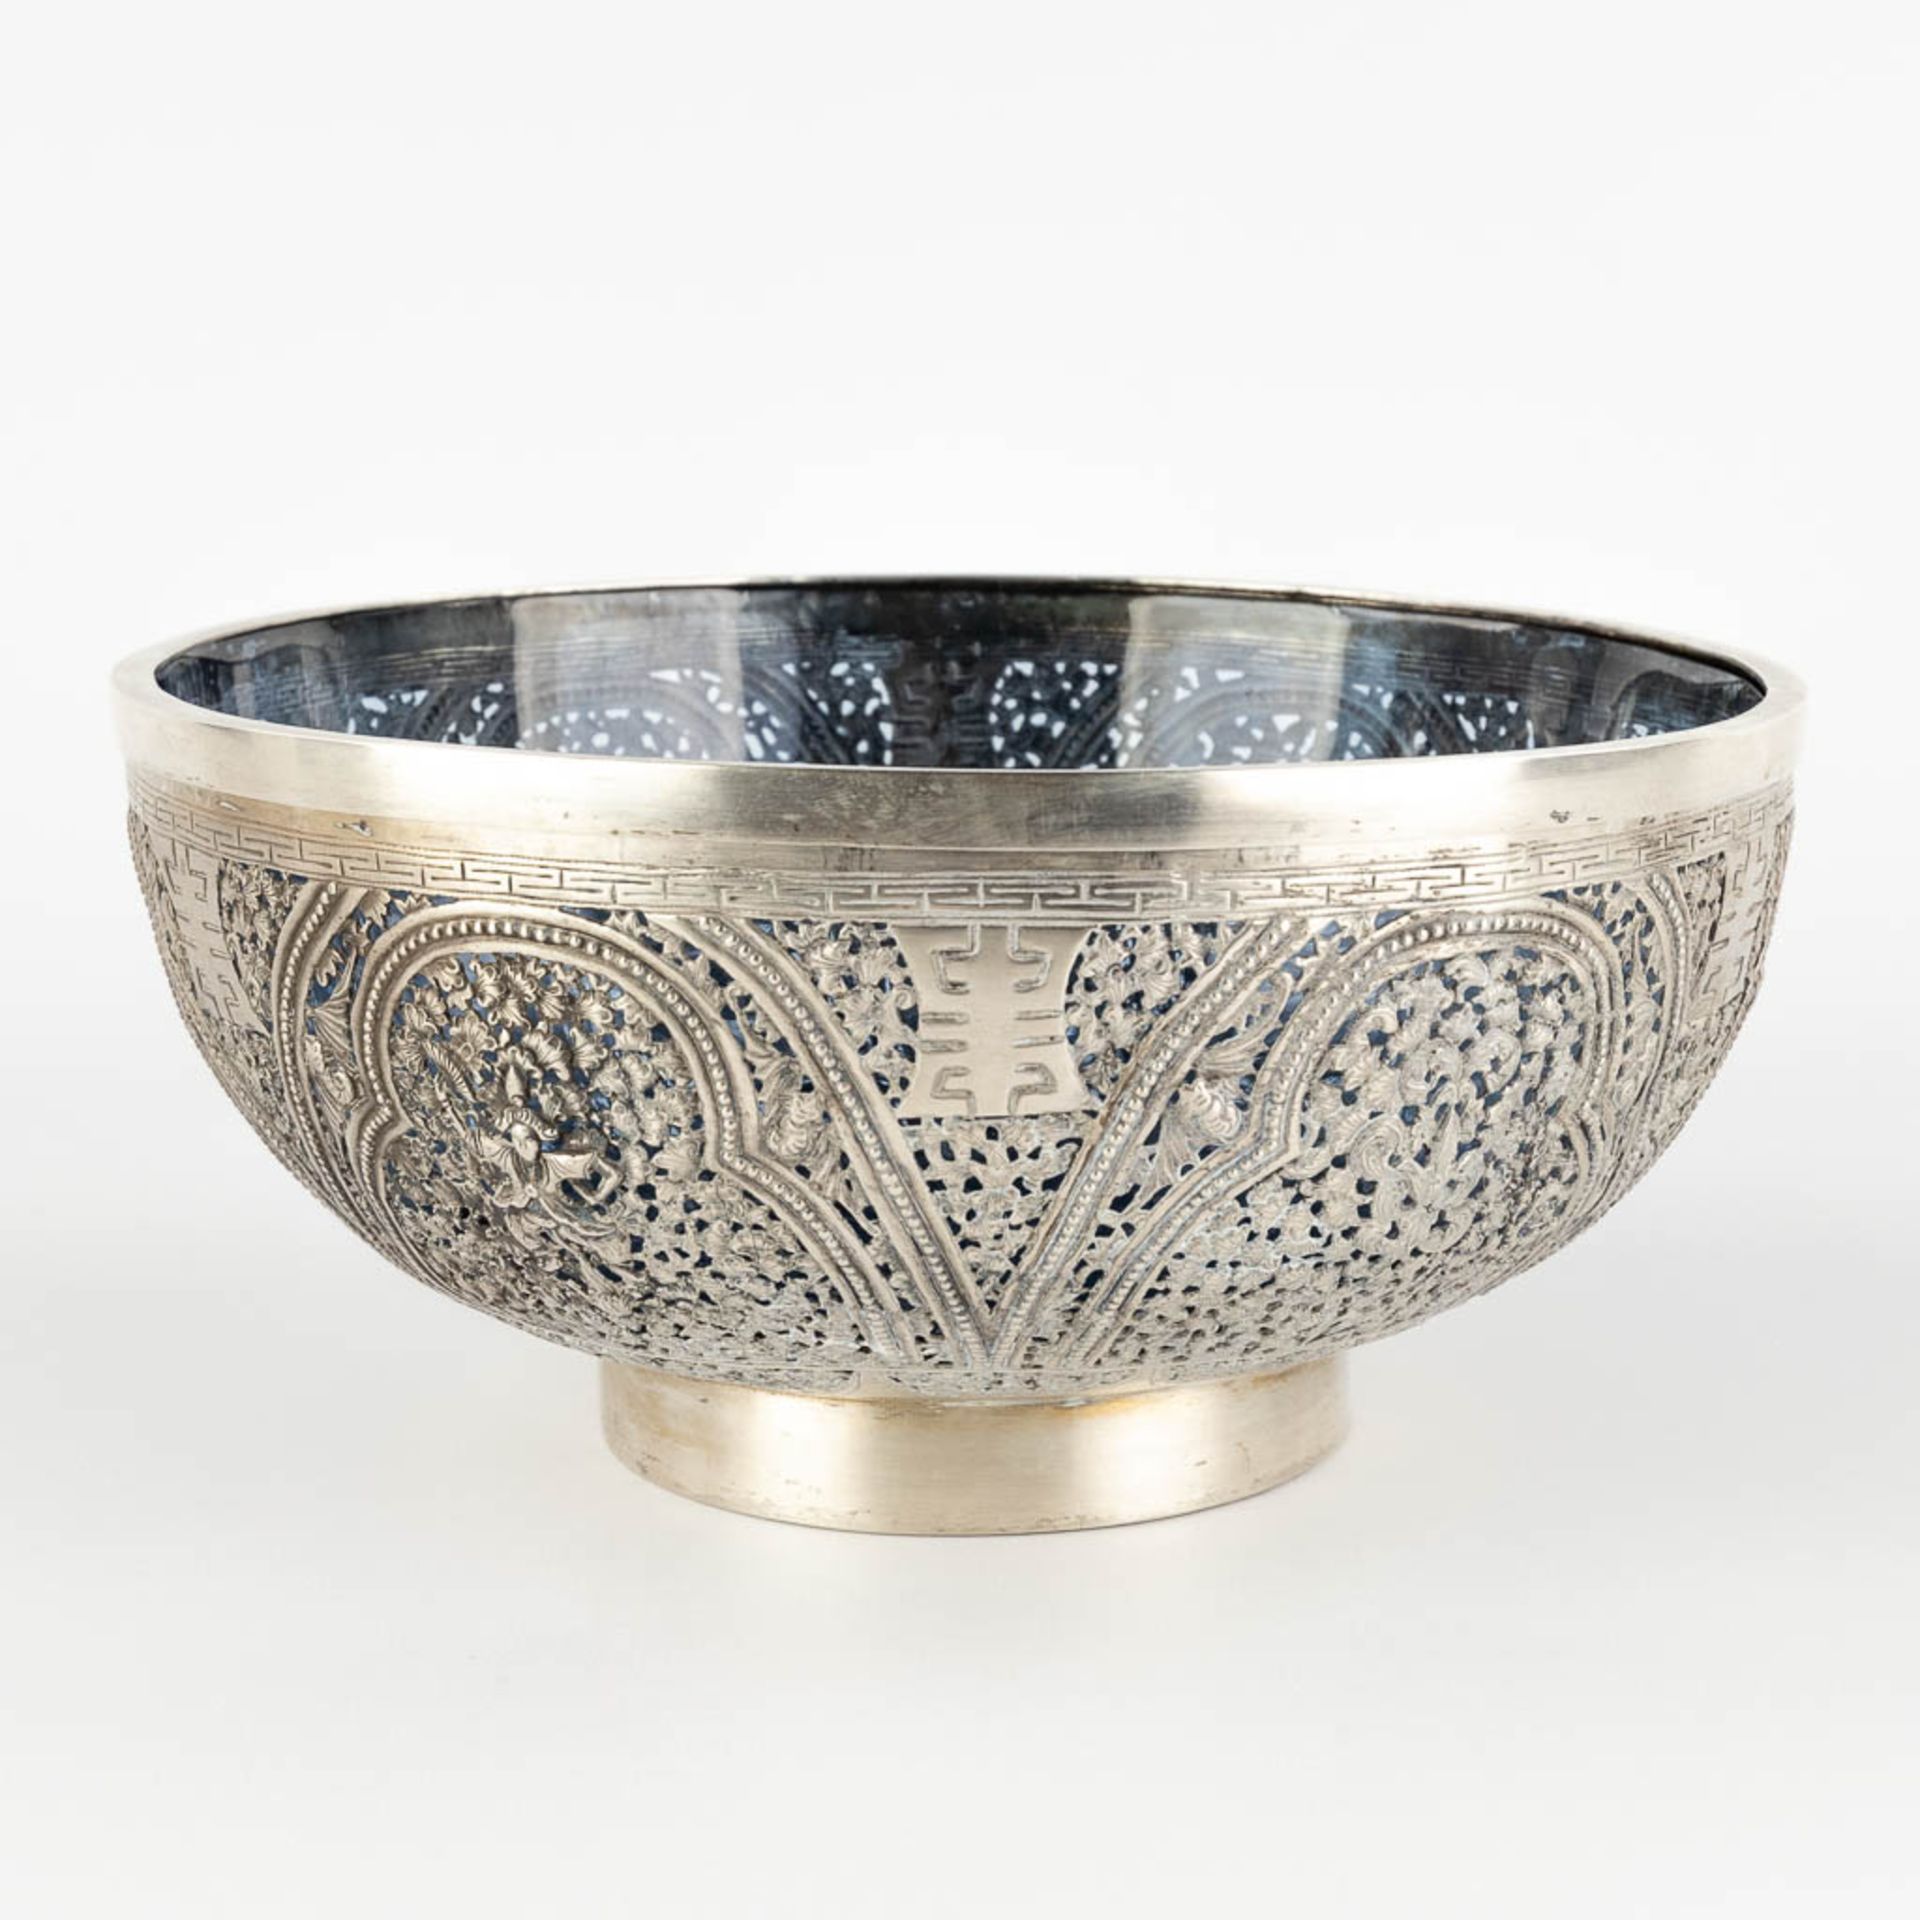 An Asian bowl, silver with a blue glass liner, decorated with bats and lotus flowers. 320g. (H:10 x